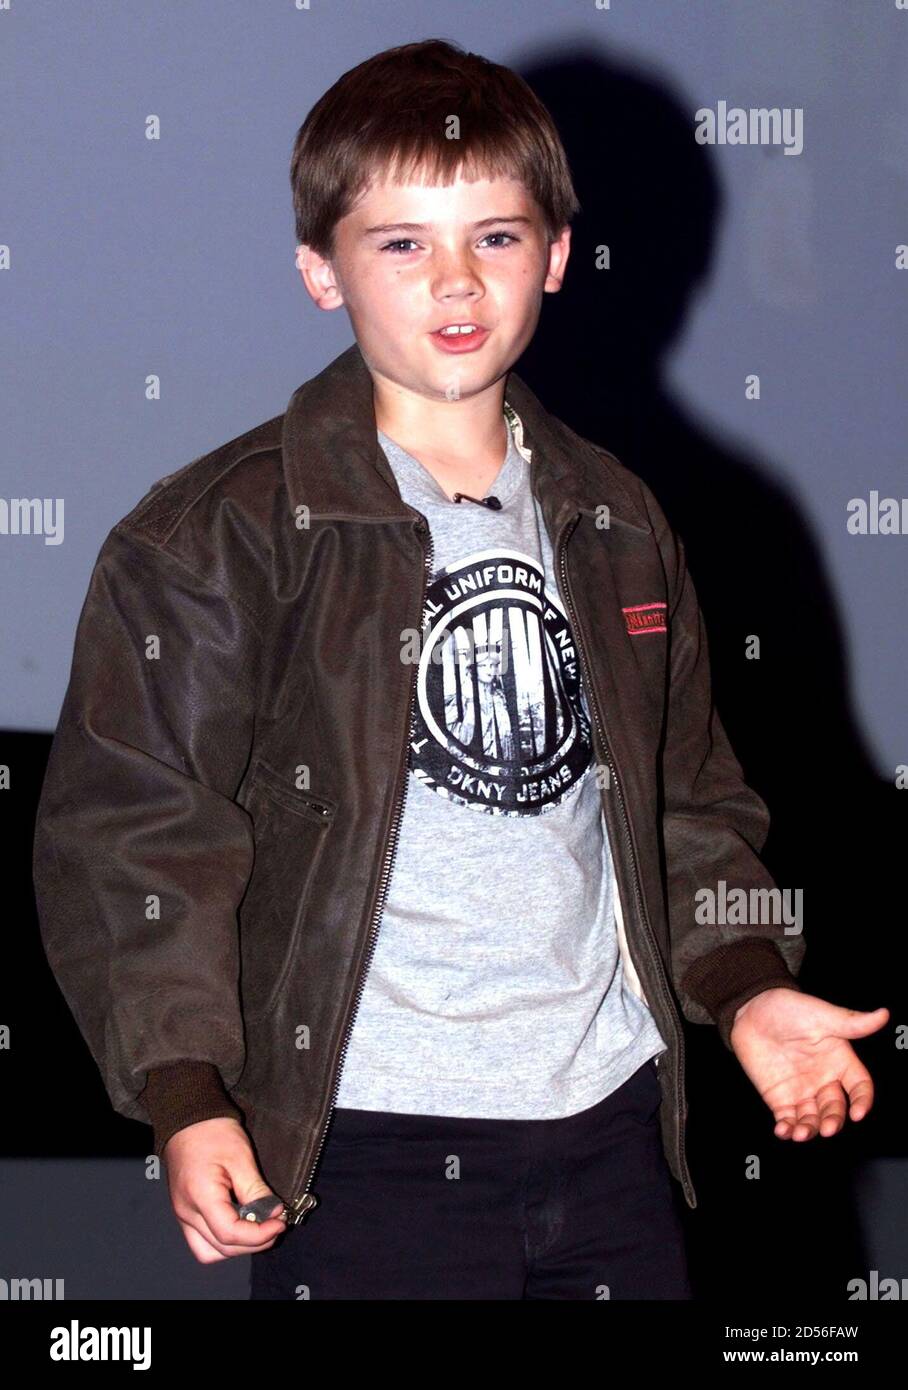 Ten year-old actor Jake Lloyd, who plays young Anakin Skywalker, in the new  film " Star Wars Episode I: The Phantom Menace" speaks at the introduction  of the new Ninentendo video game "